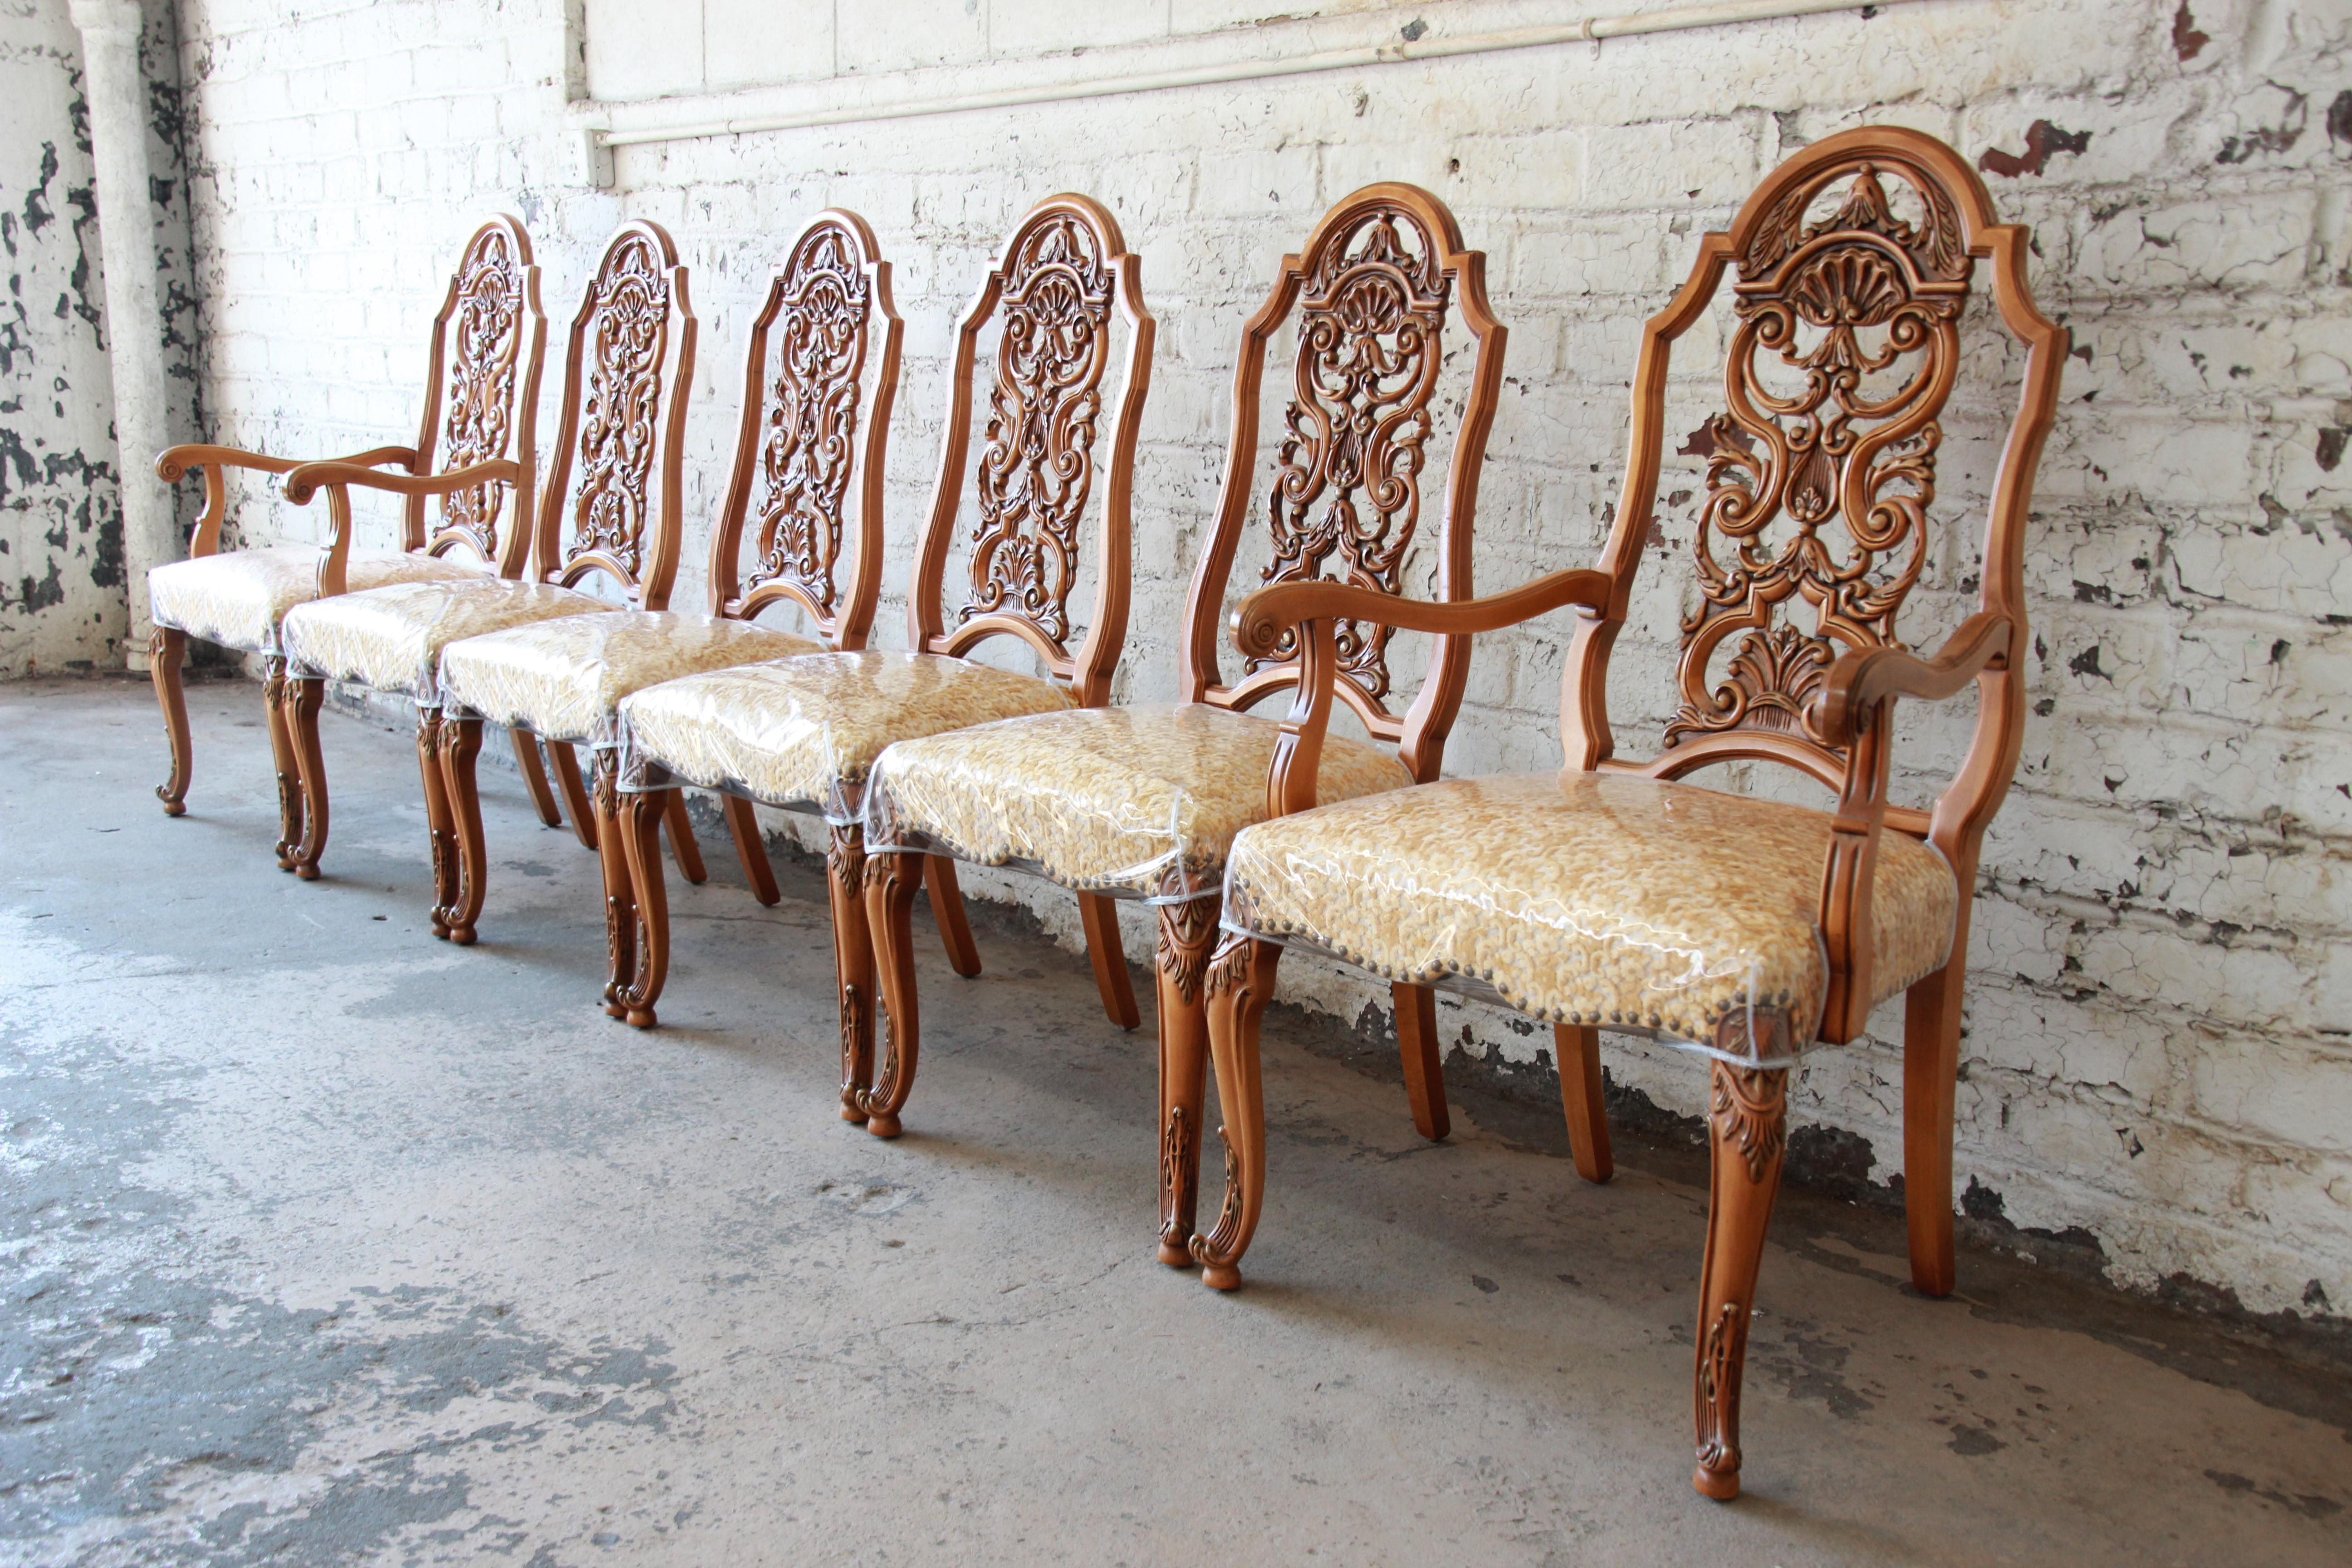 An outstanding set of six ornate French carved dining chairs by Romweber. The set includes two armchairs and four side chairs. The chairs are constructed from solid hardwood with superior quality and the highest attention to detail. The studded